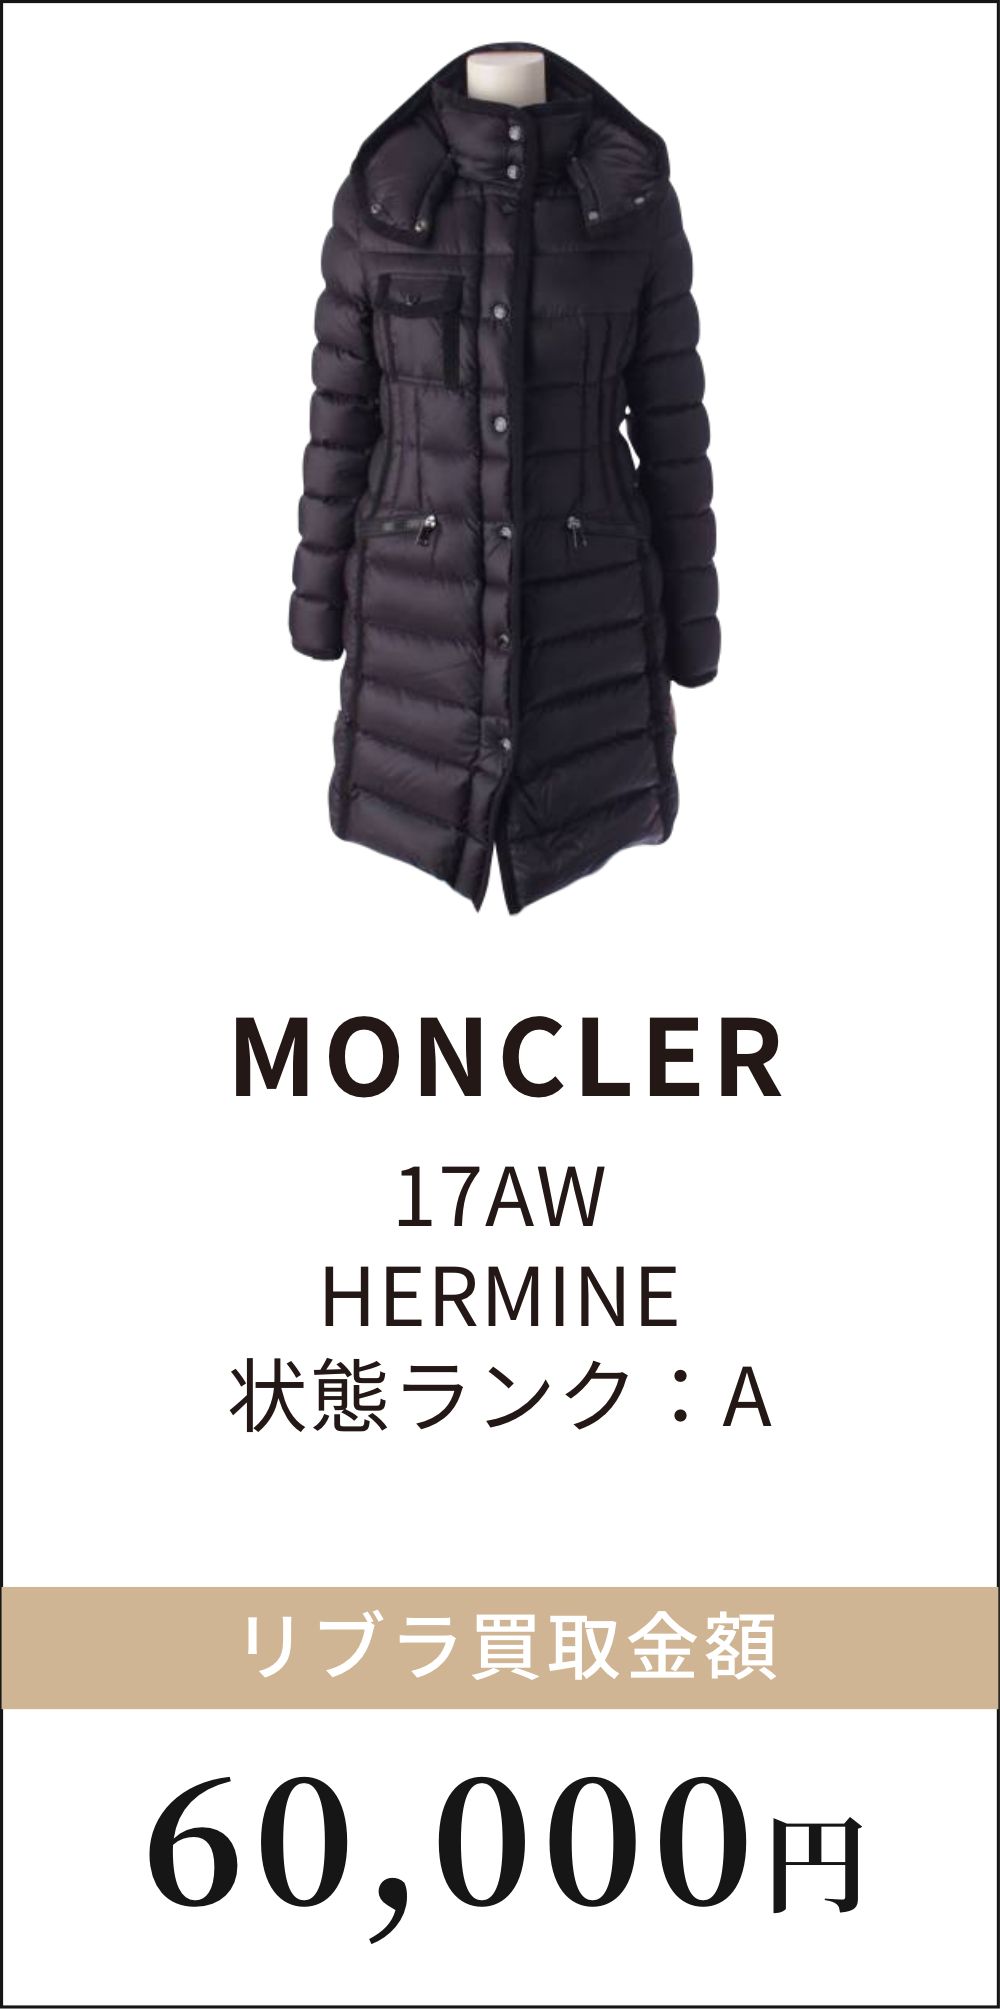 MONCLER 17AW HERMINE